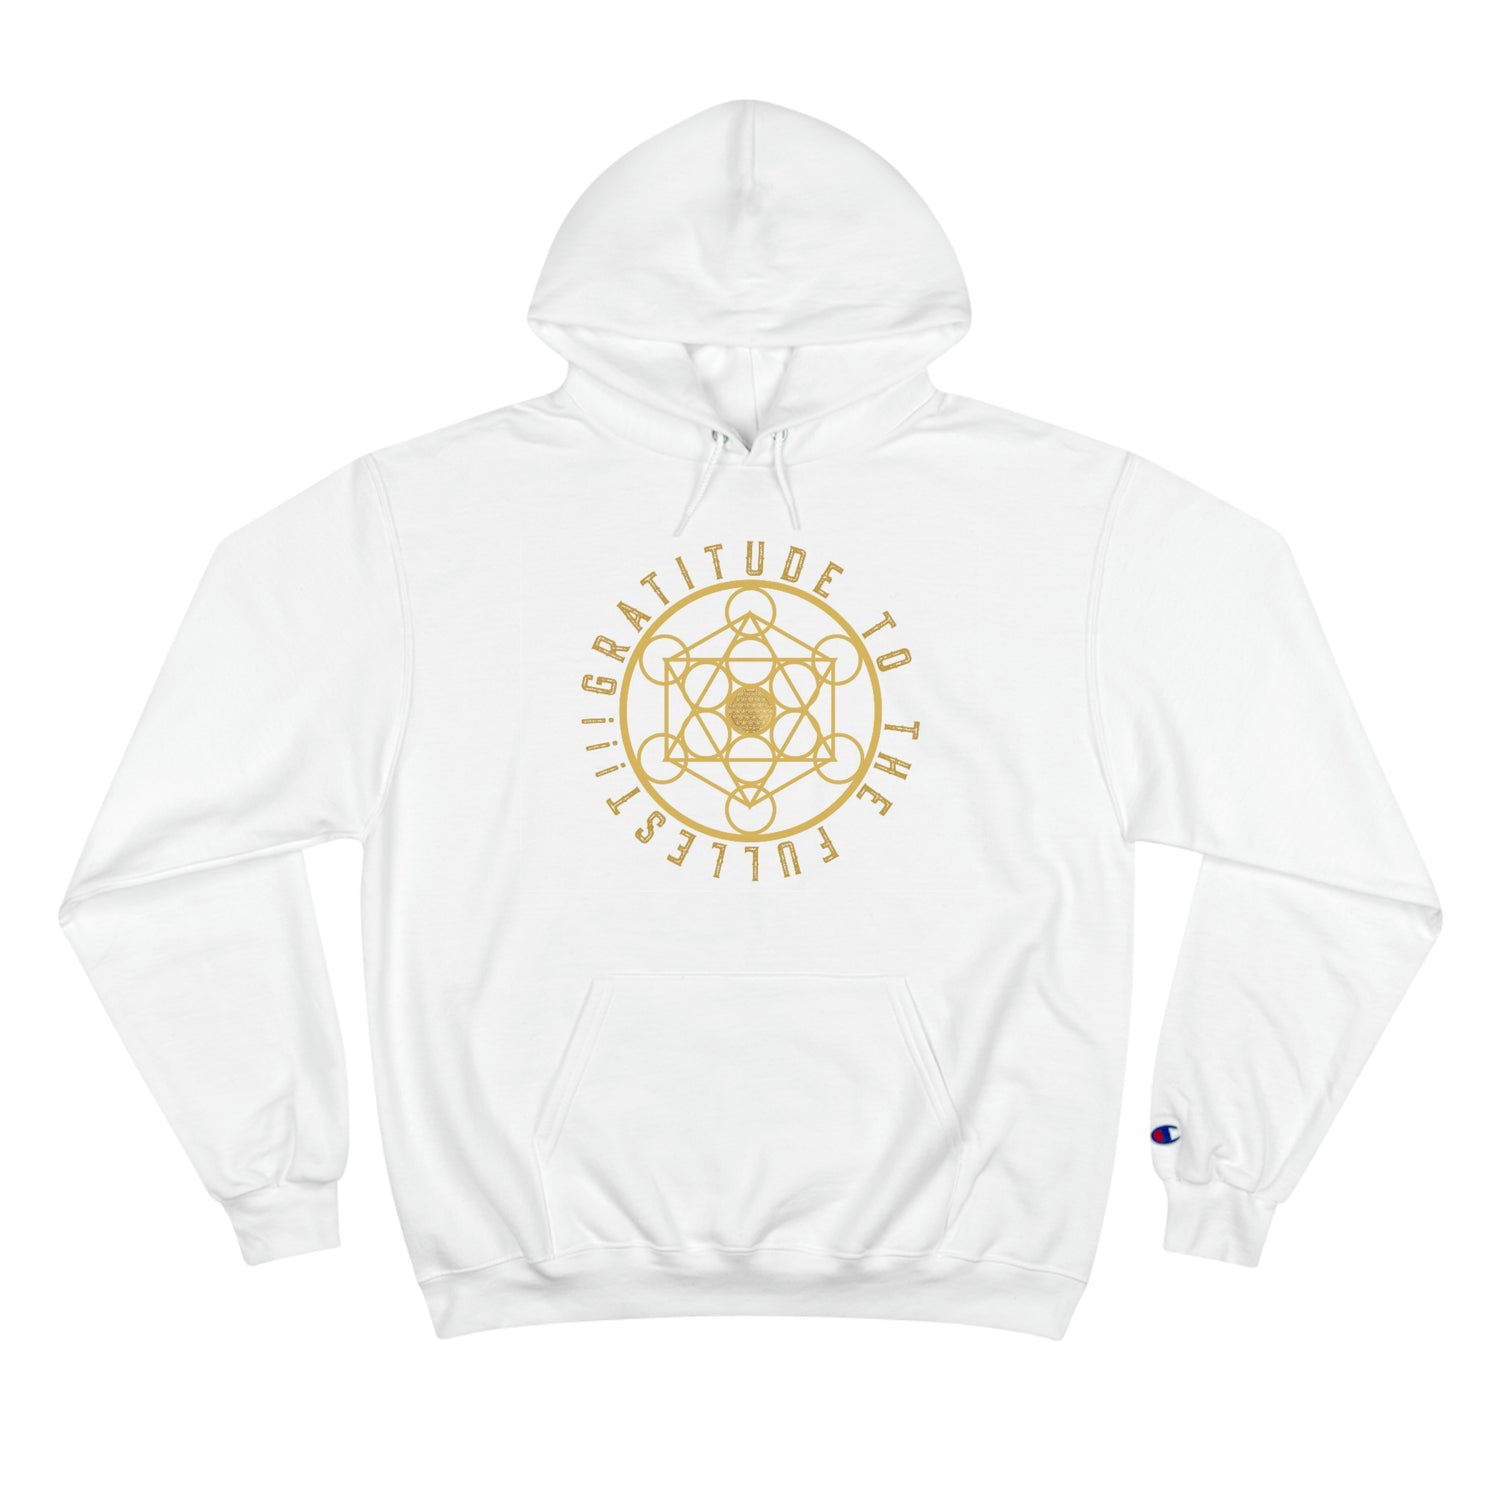 GRATITUDE TO THE FULLEST!!! - Champion Hoodie